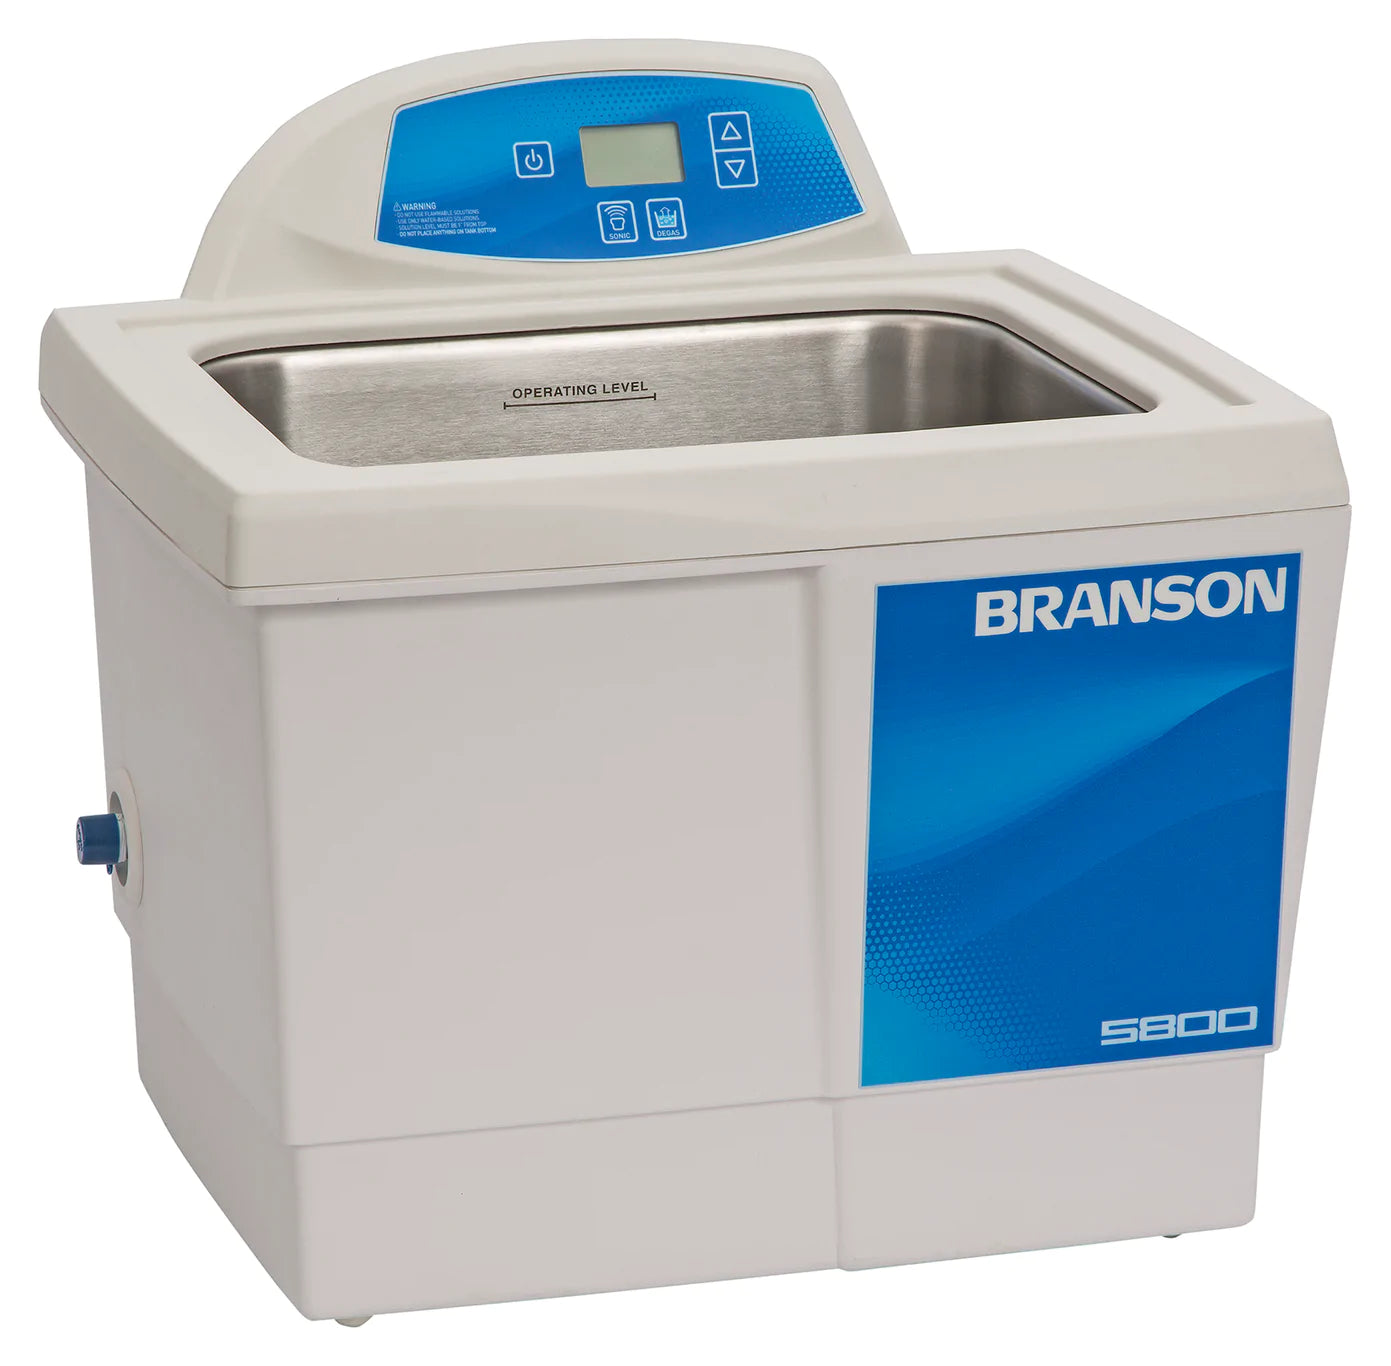 branson-cpx3800h-1-5gal-ultrasonic-cleaner-heated-115v-60hz-cpx-952-318r